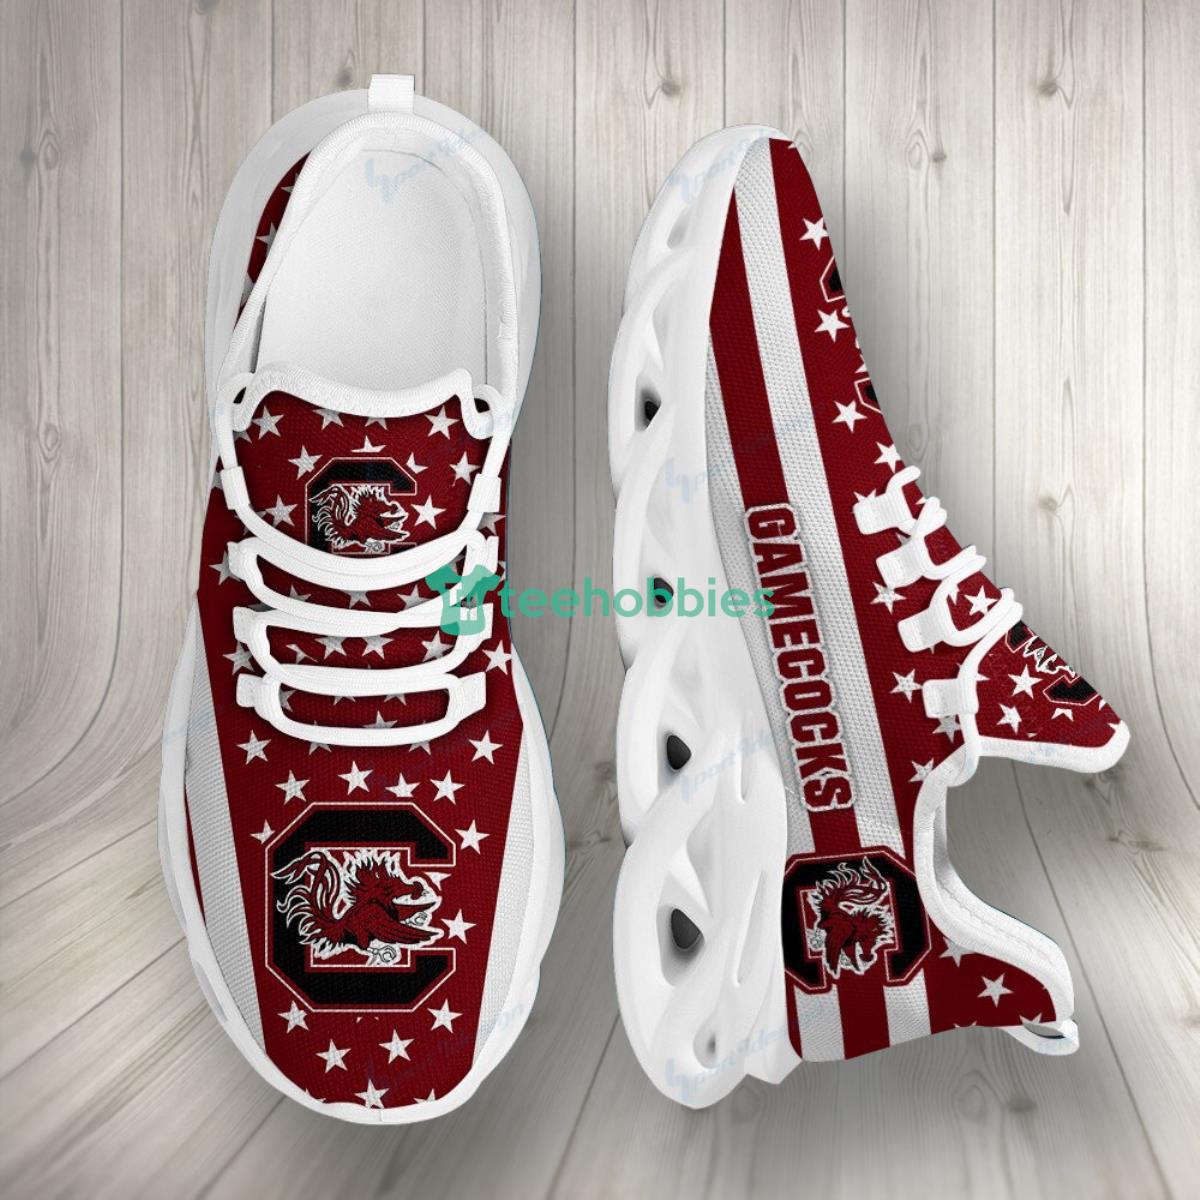 South Carolina Gamecocks Max Soul Shoes New Model Sneakers Gift For Fans Product Photo 2